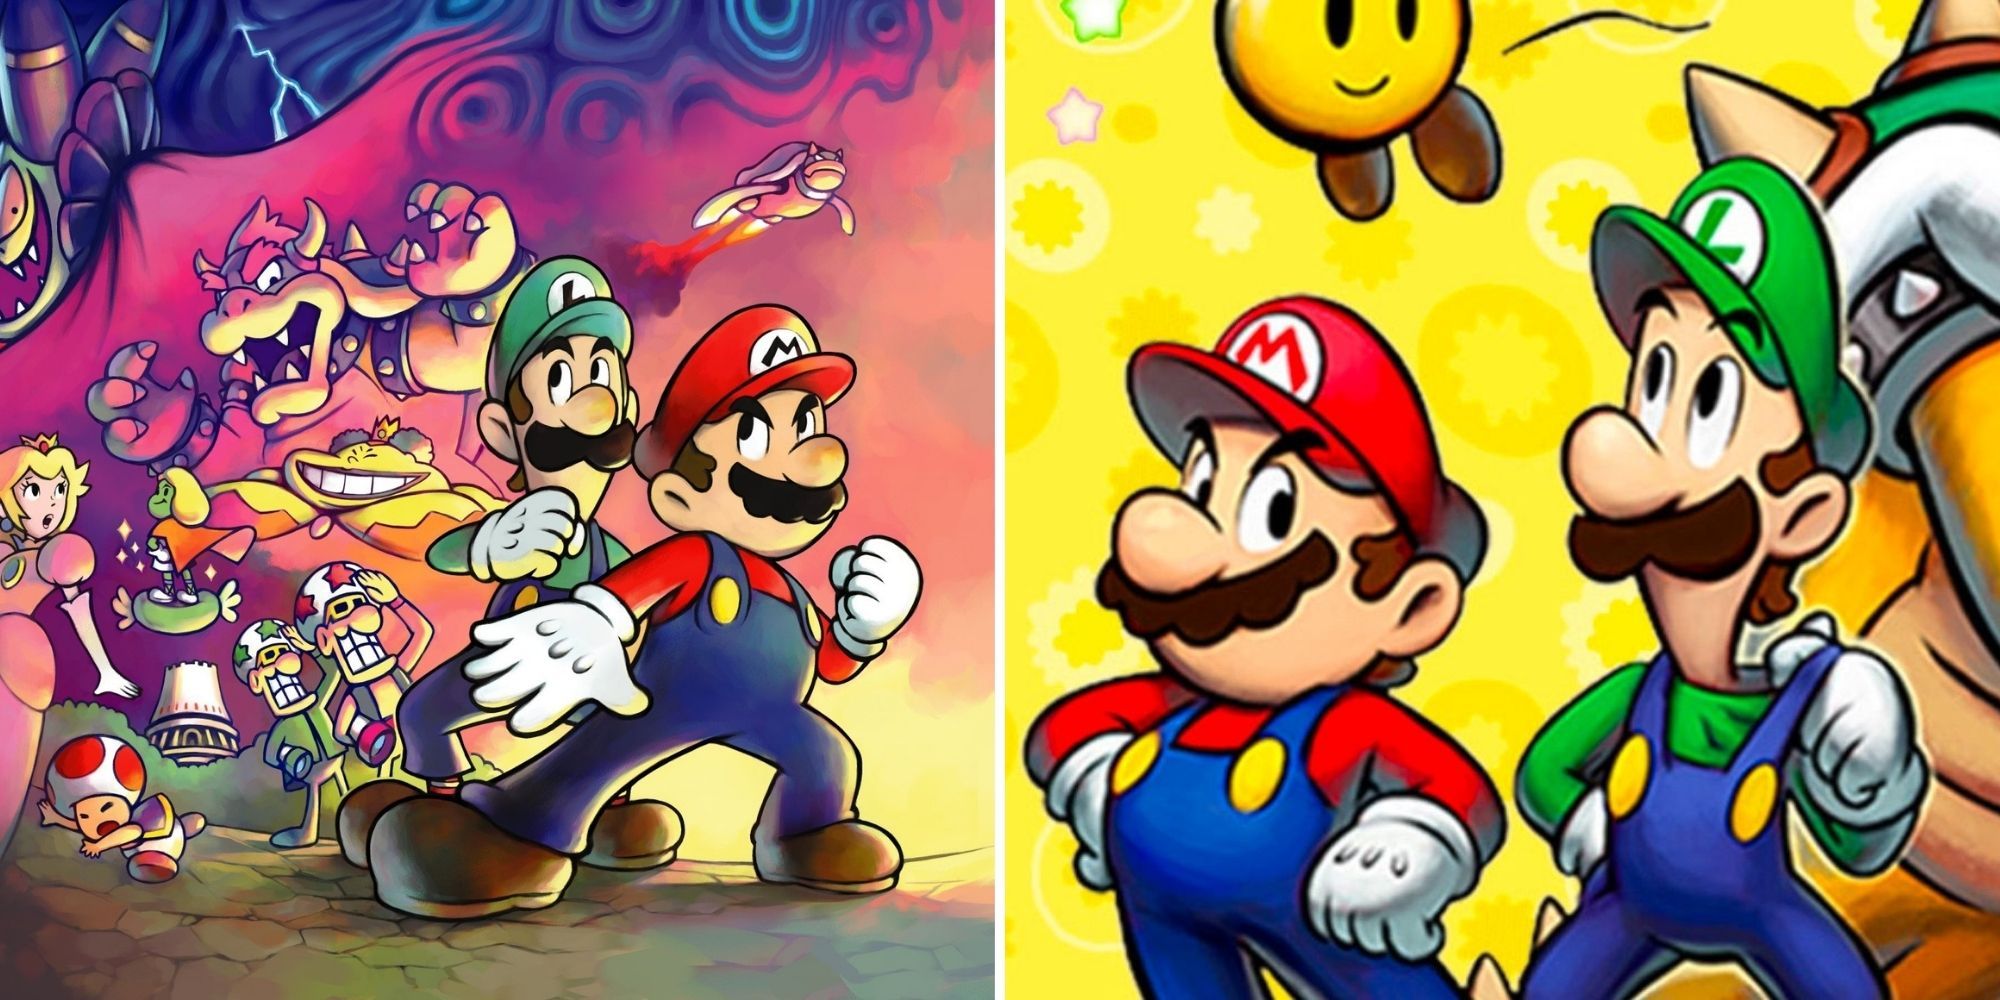 Mario and Luigi prepare to attack under a dark sky and pose beside Boswer and Starlow